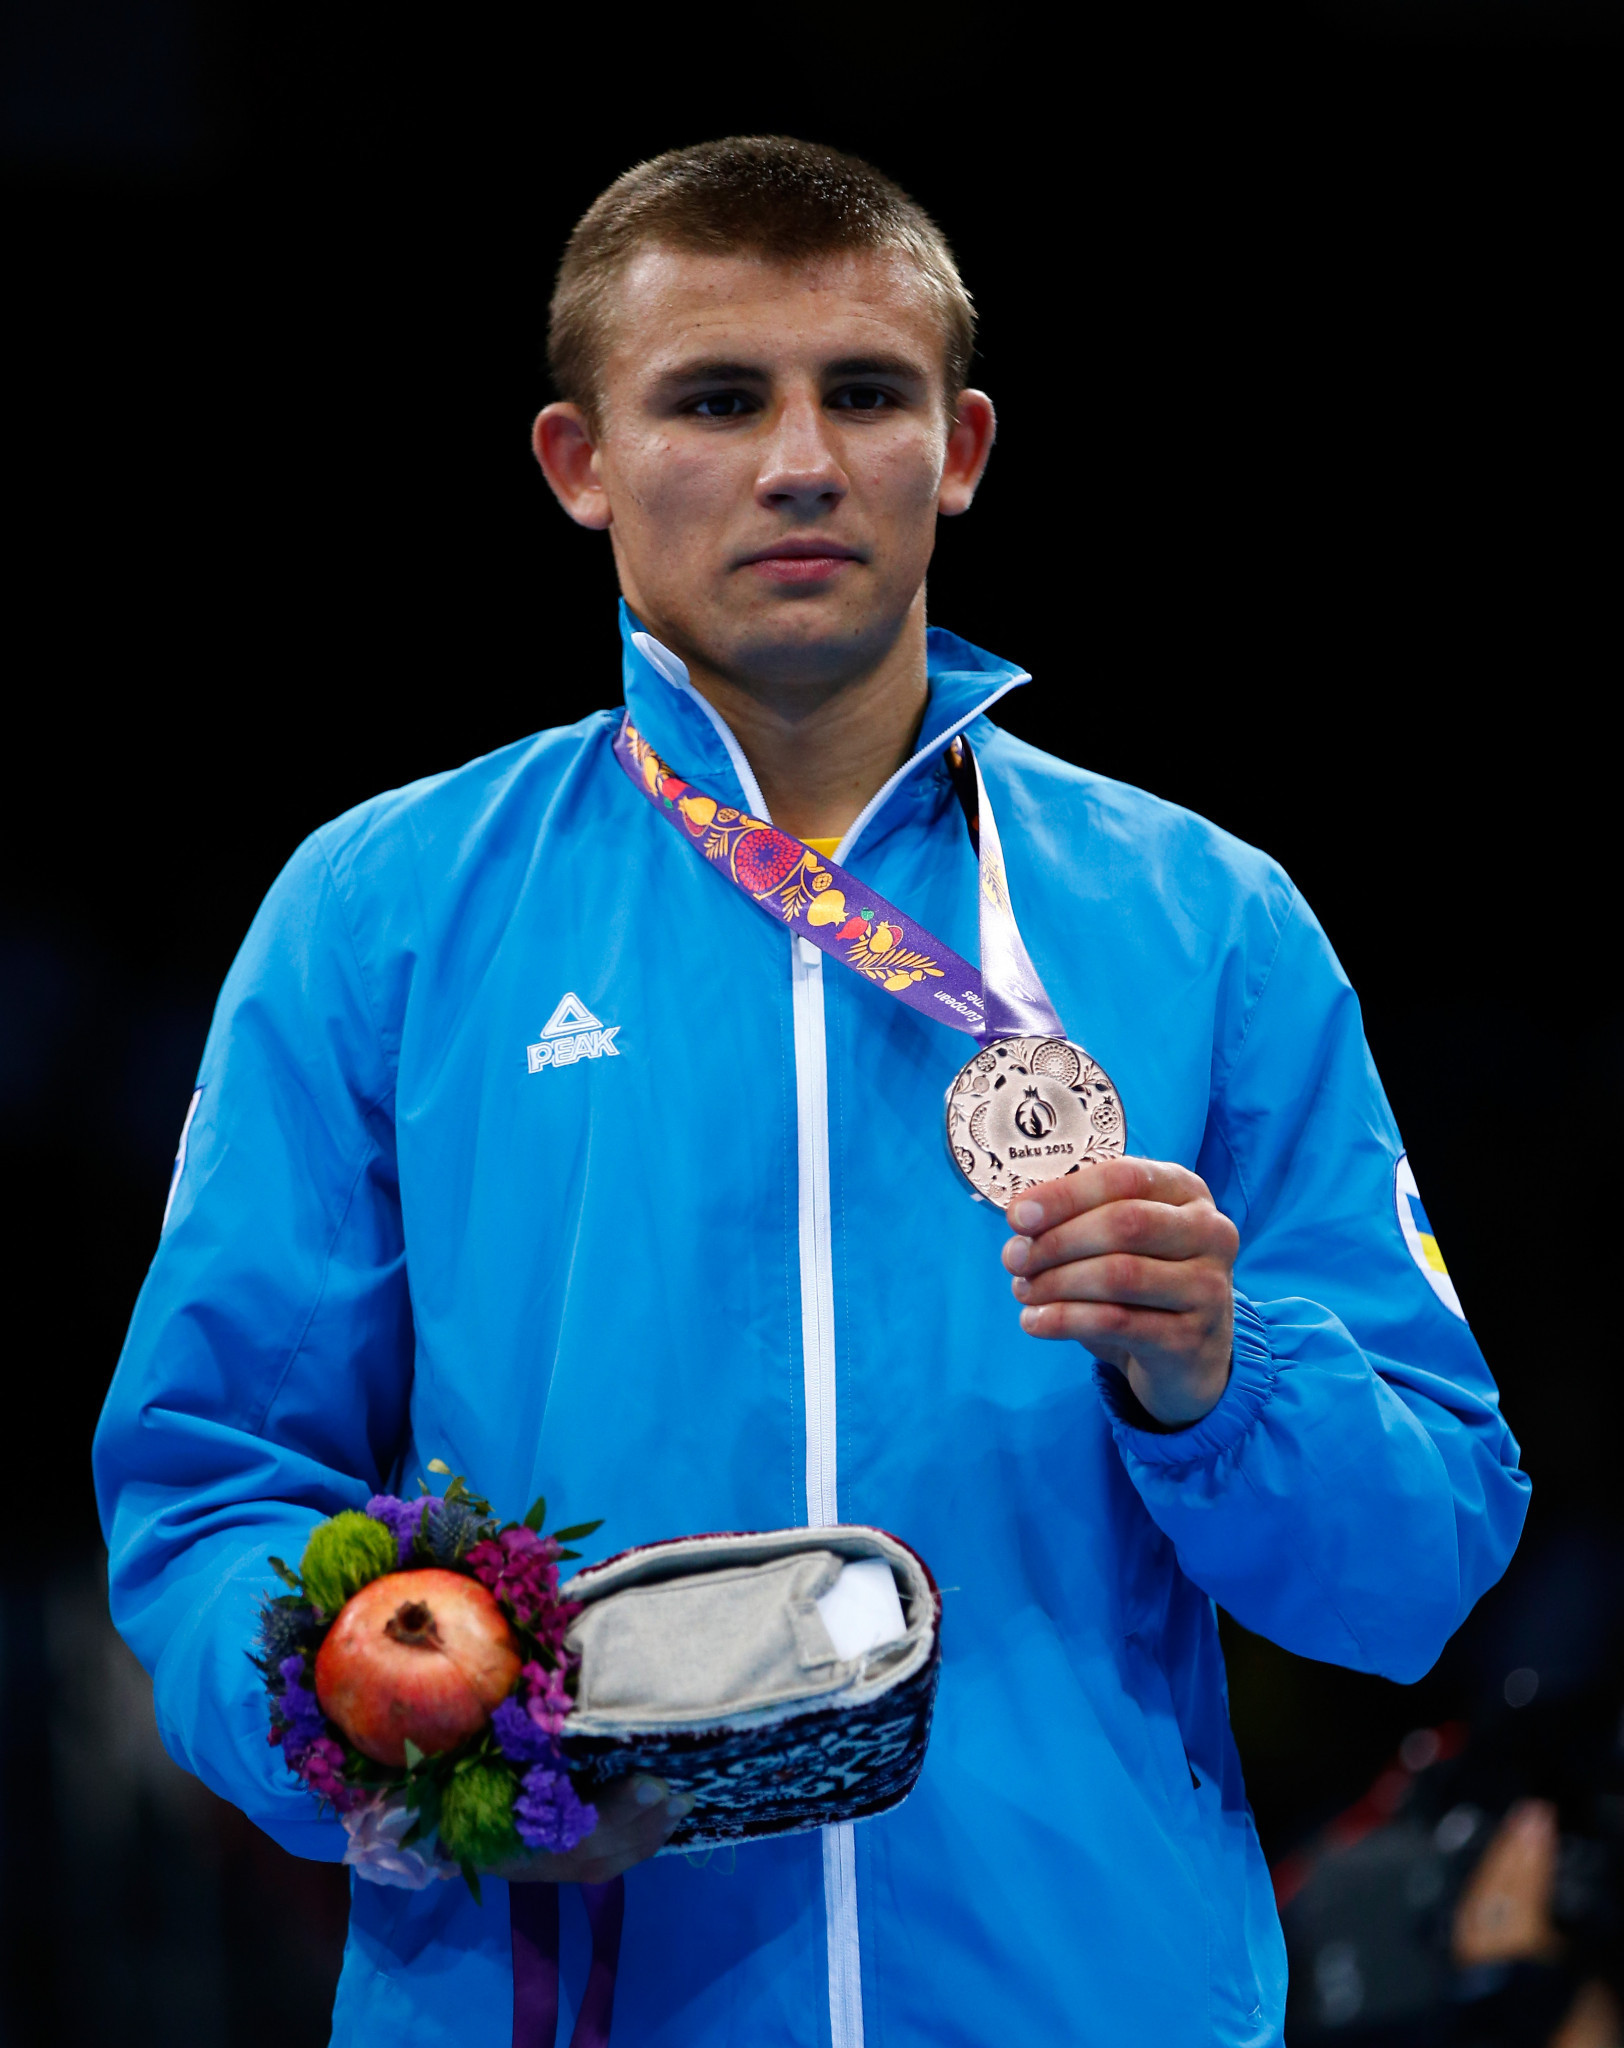 Ukraine's Oleksandr Khyzhniak, the 2017 world middleweight champion, is one of two European Boxing Confederation representatives on the AIBA Athletes' Commission ©Getty Images 